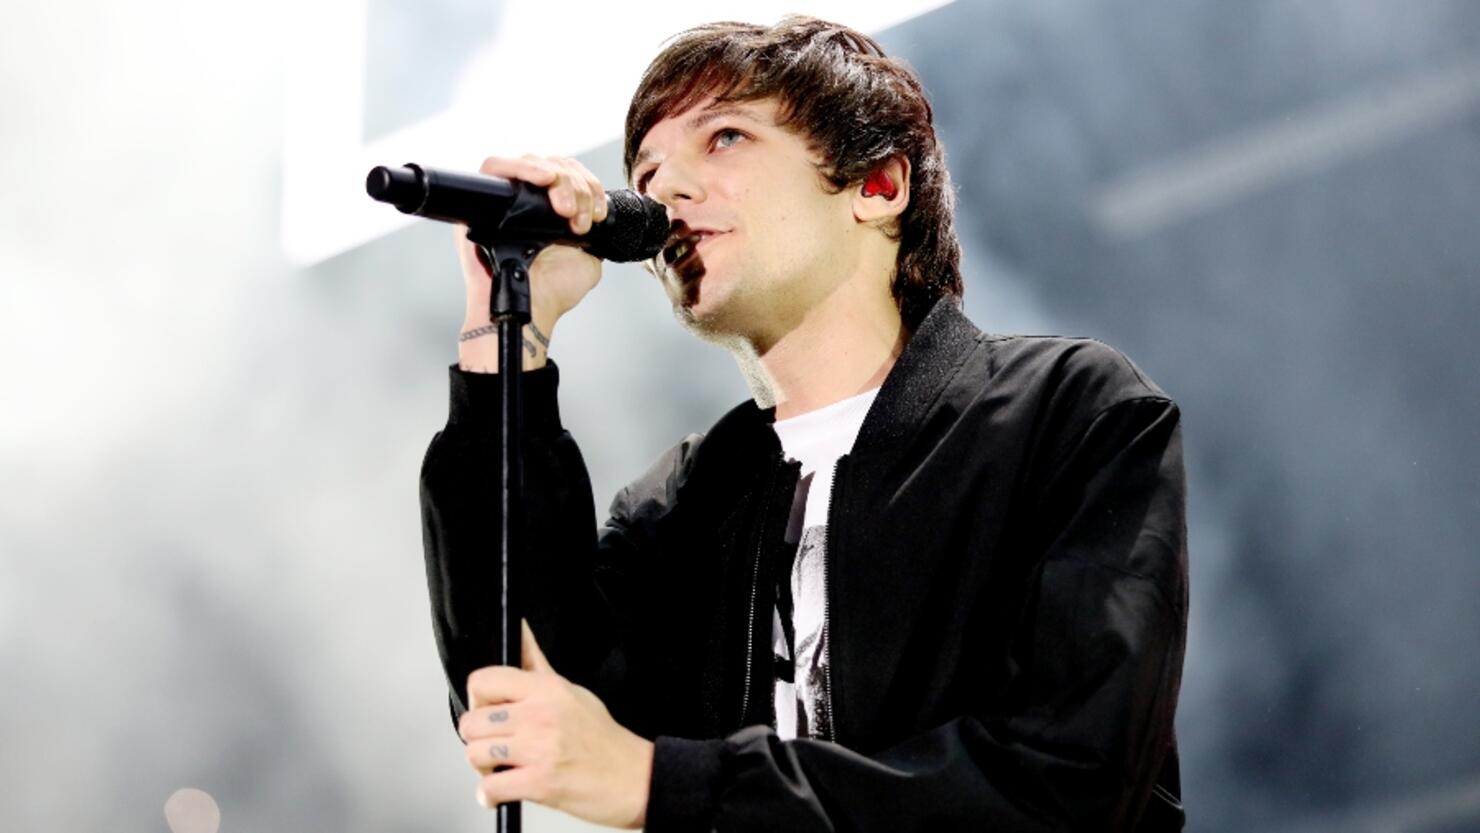 Louis Tomlinson: Everything you need to know about his debut album 'Walls